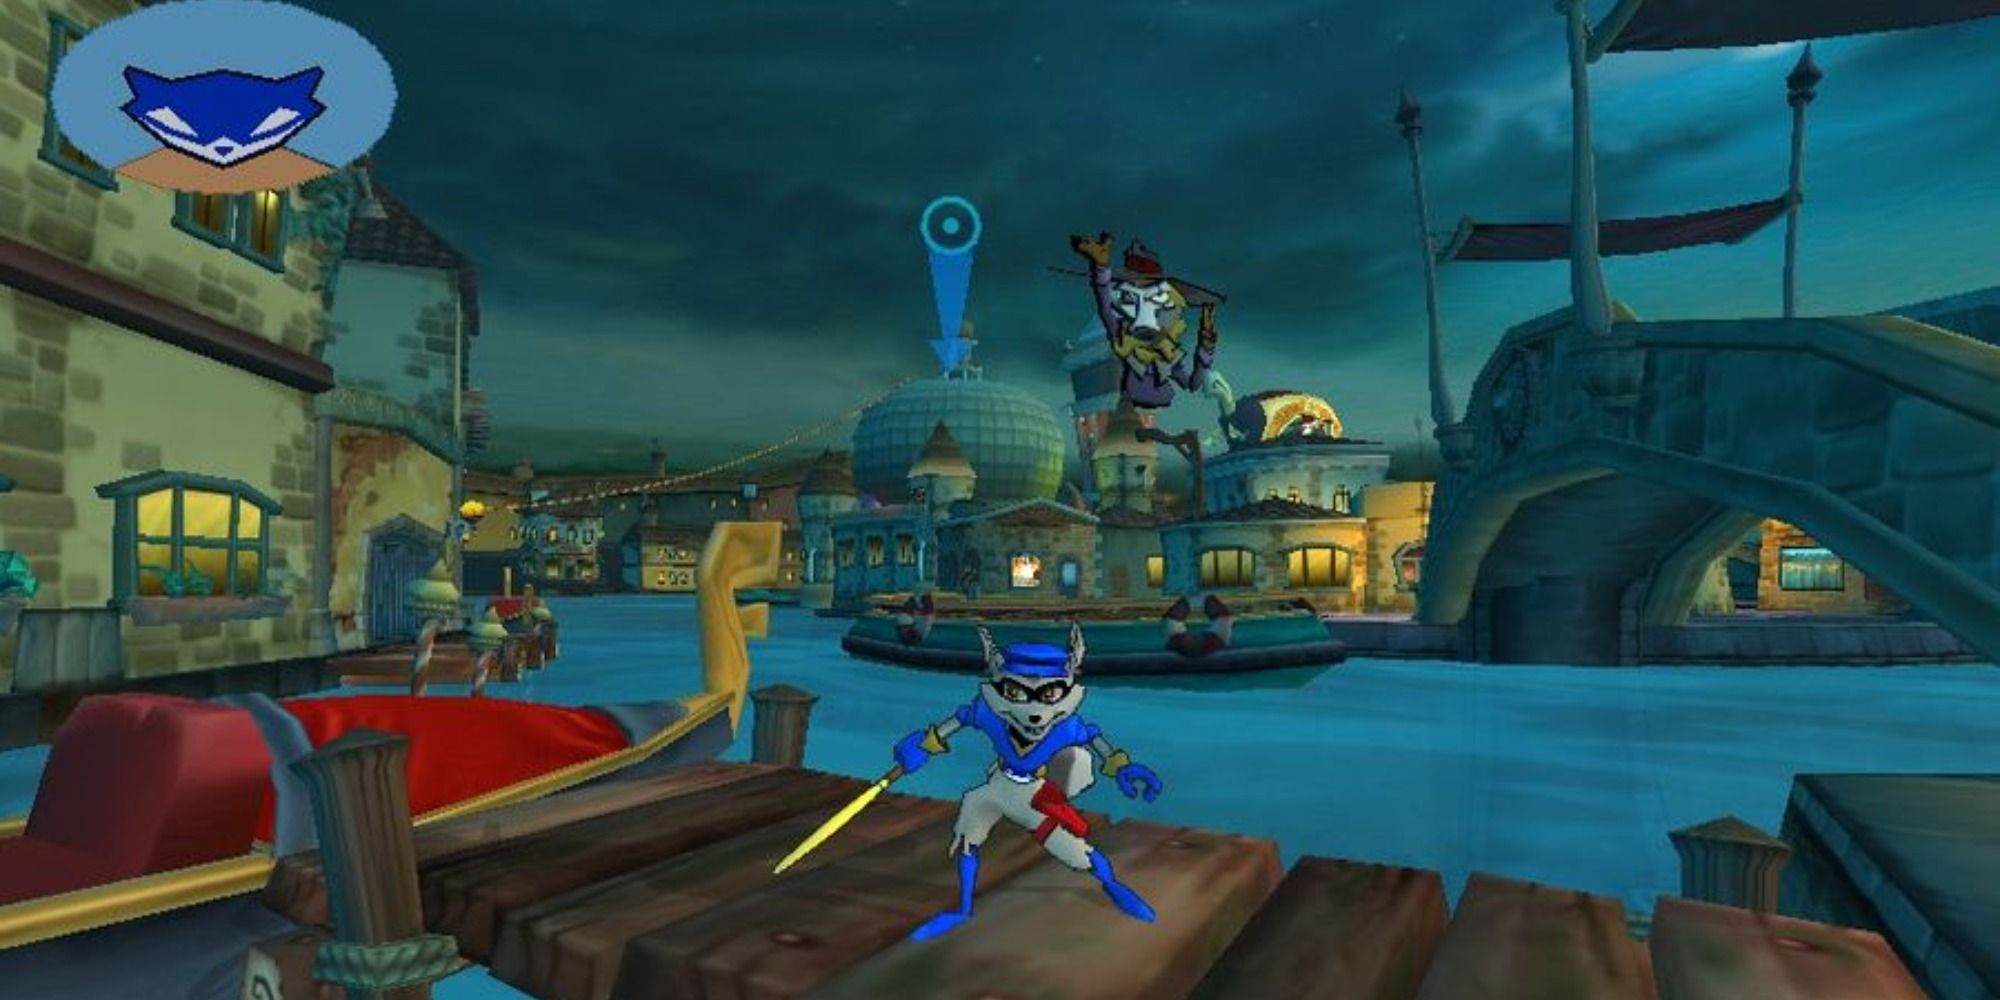 Sly Cooper on docks in city level